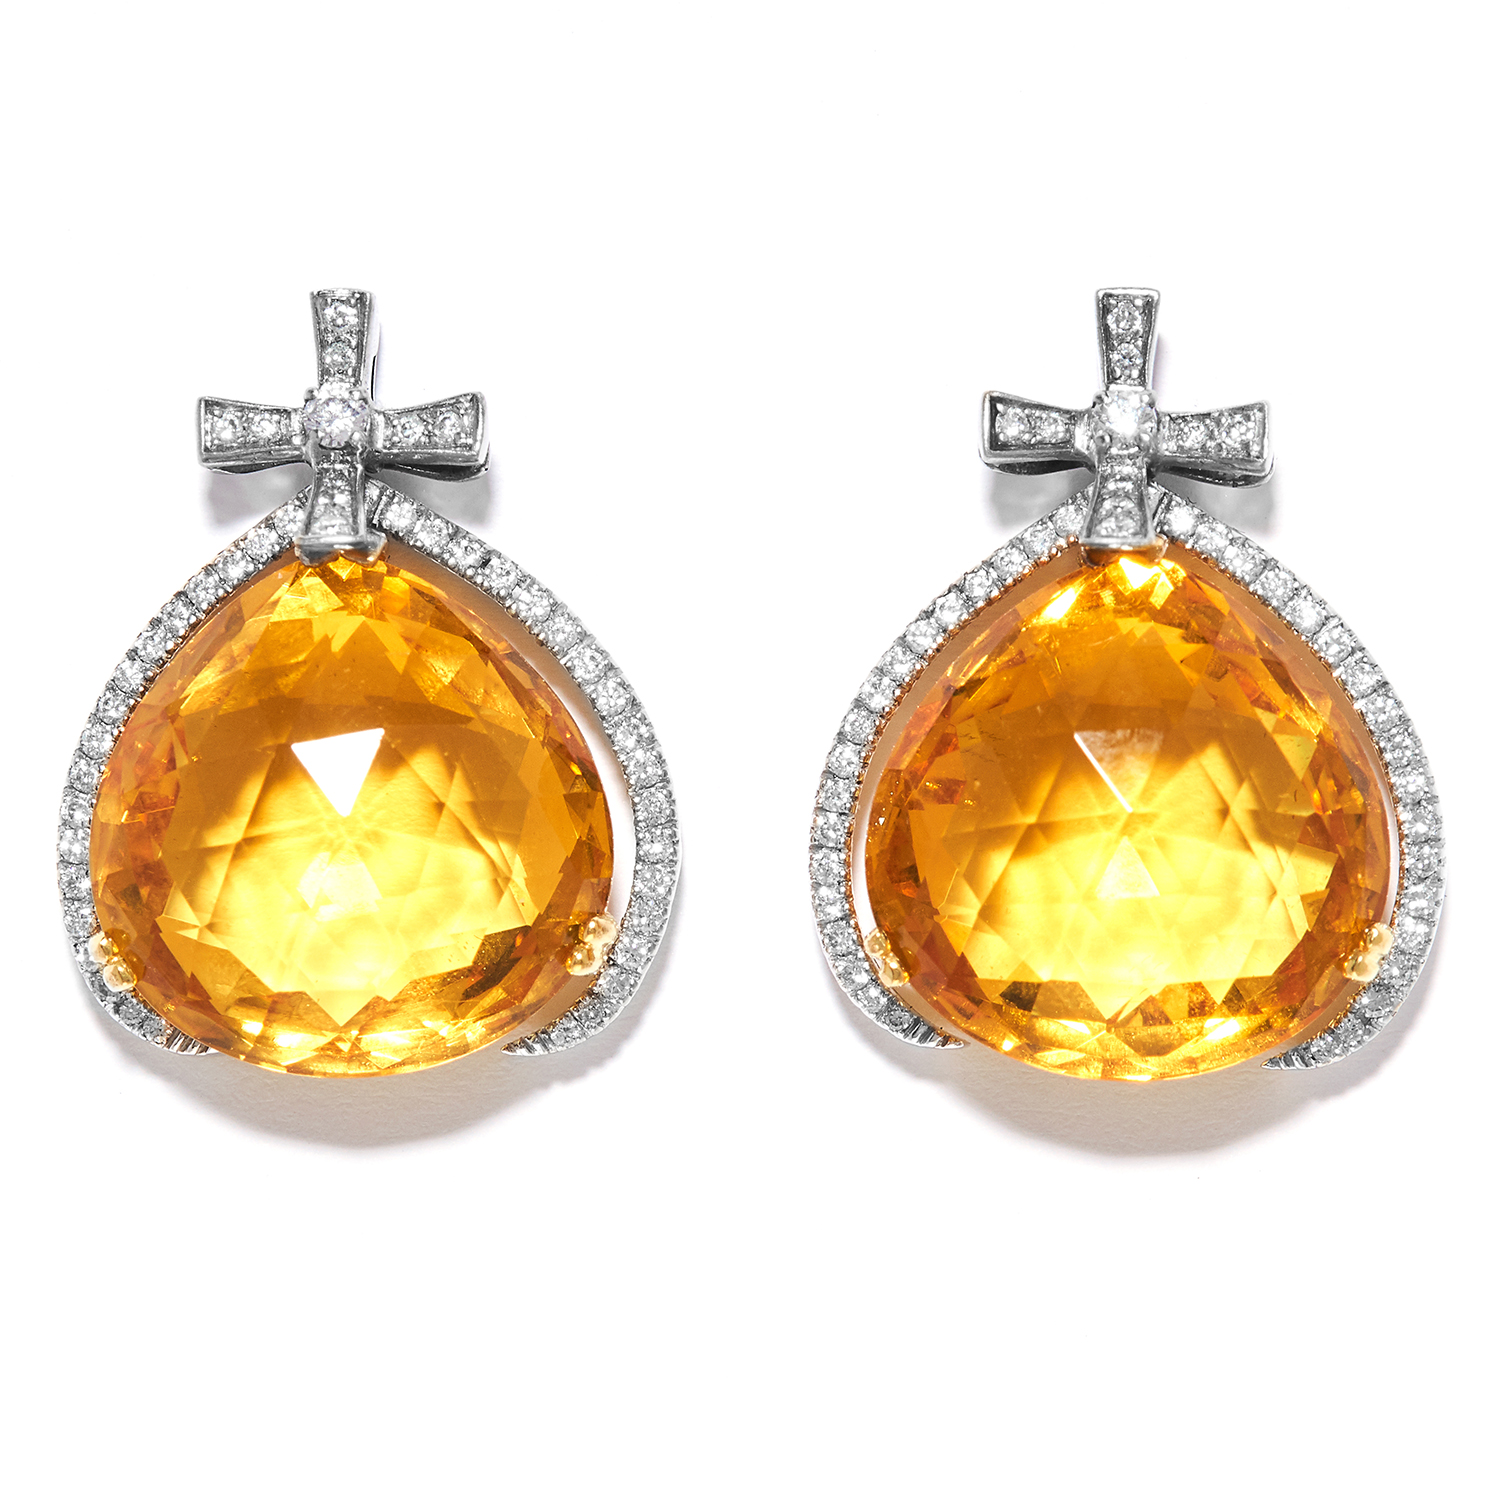 CITRINE AND DIAMOND EARRINGS in 18ct white and yellow gold, the pear shaped citrines suspended